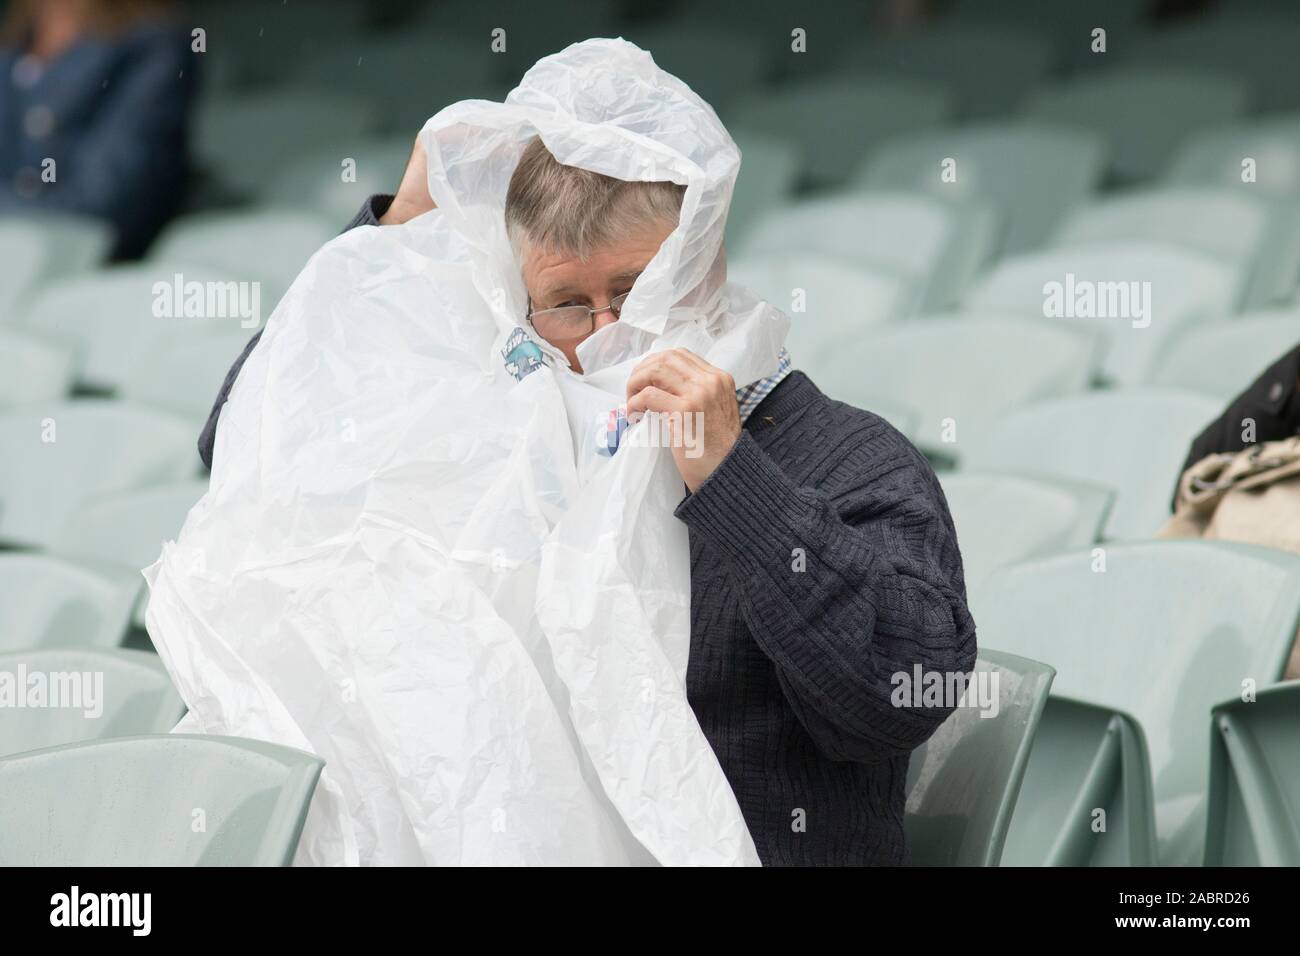 Adelaide, Australia 29 November 2019. Australian cricket fans during a rain delay on the opening day  of the 2nd Domain Day Night test between Australia and Pakistan at the Adelaide Oval. Australia leads 1-0 in the 2 match series .Credit: amer ghazzal/Alamy Live News Stock Photo